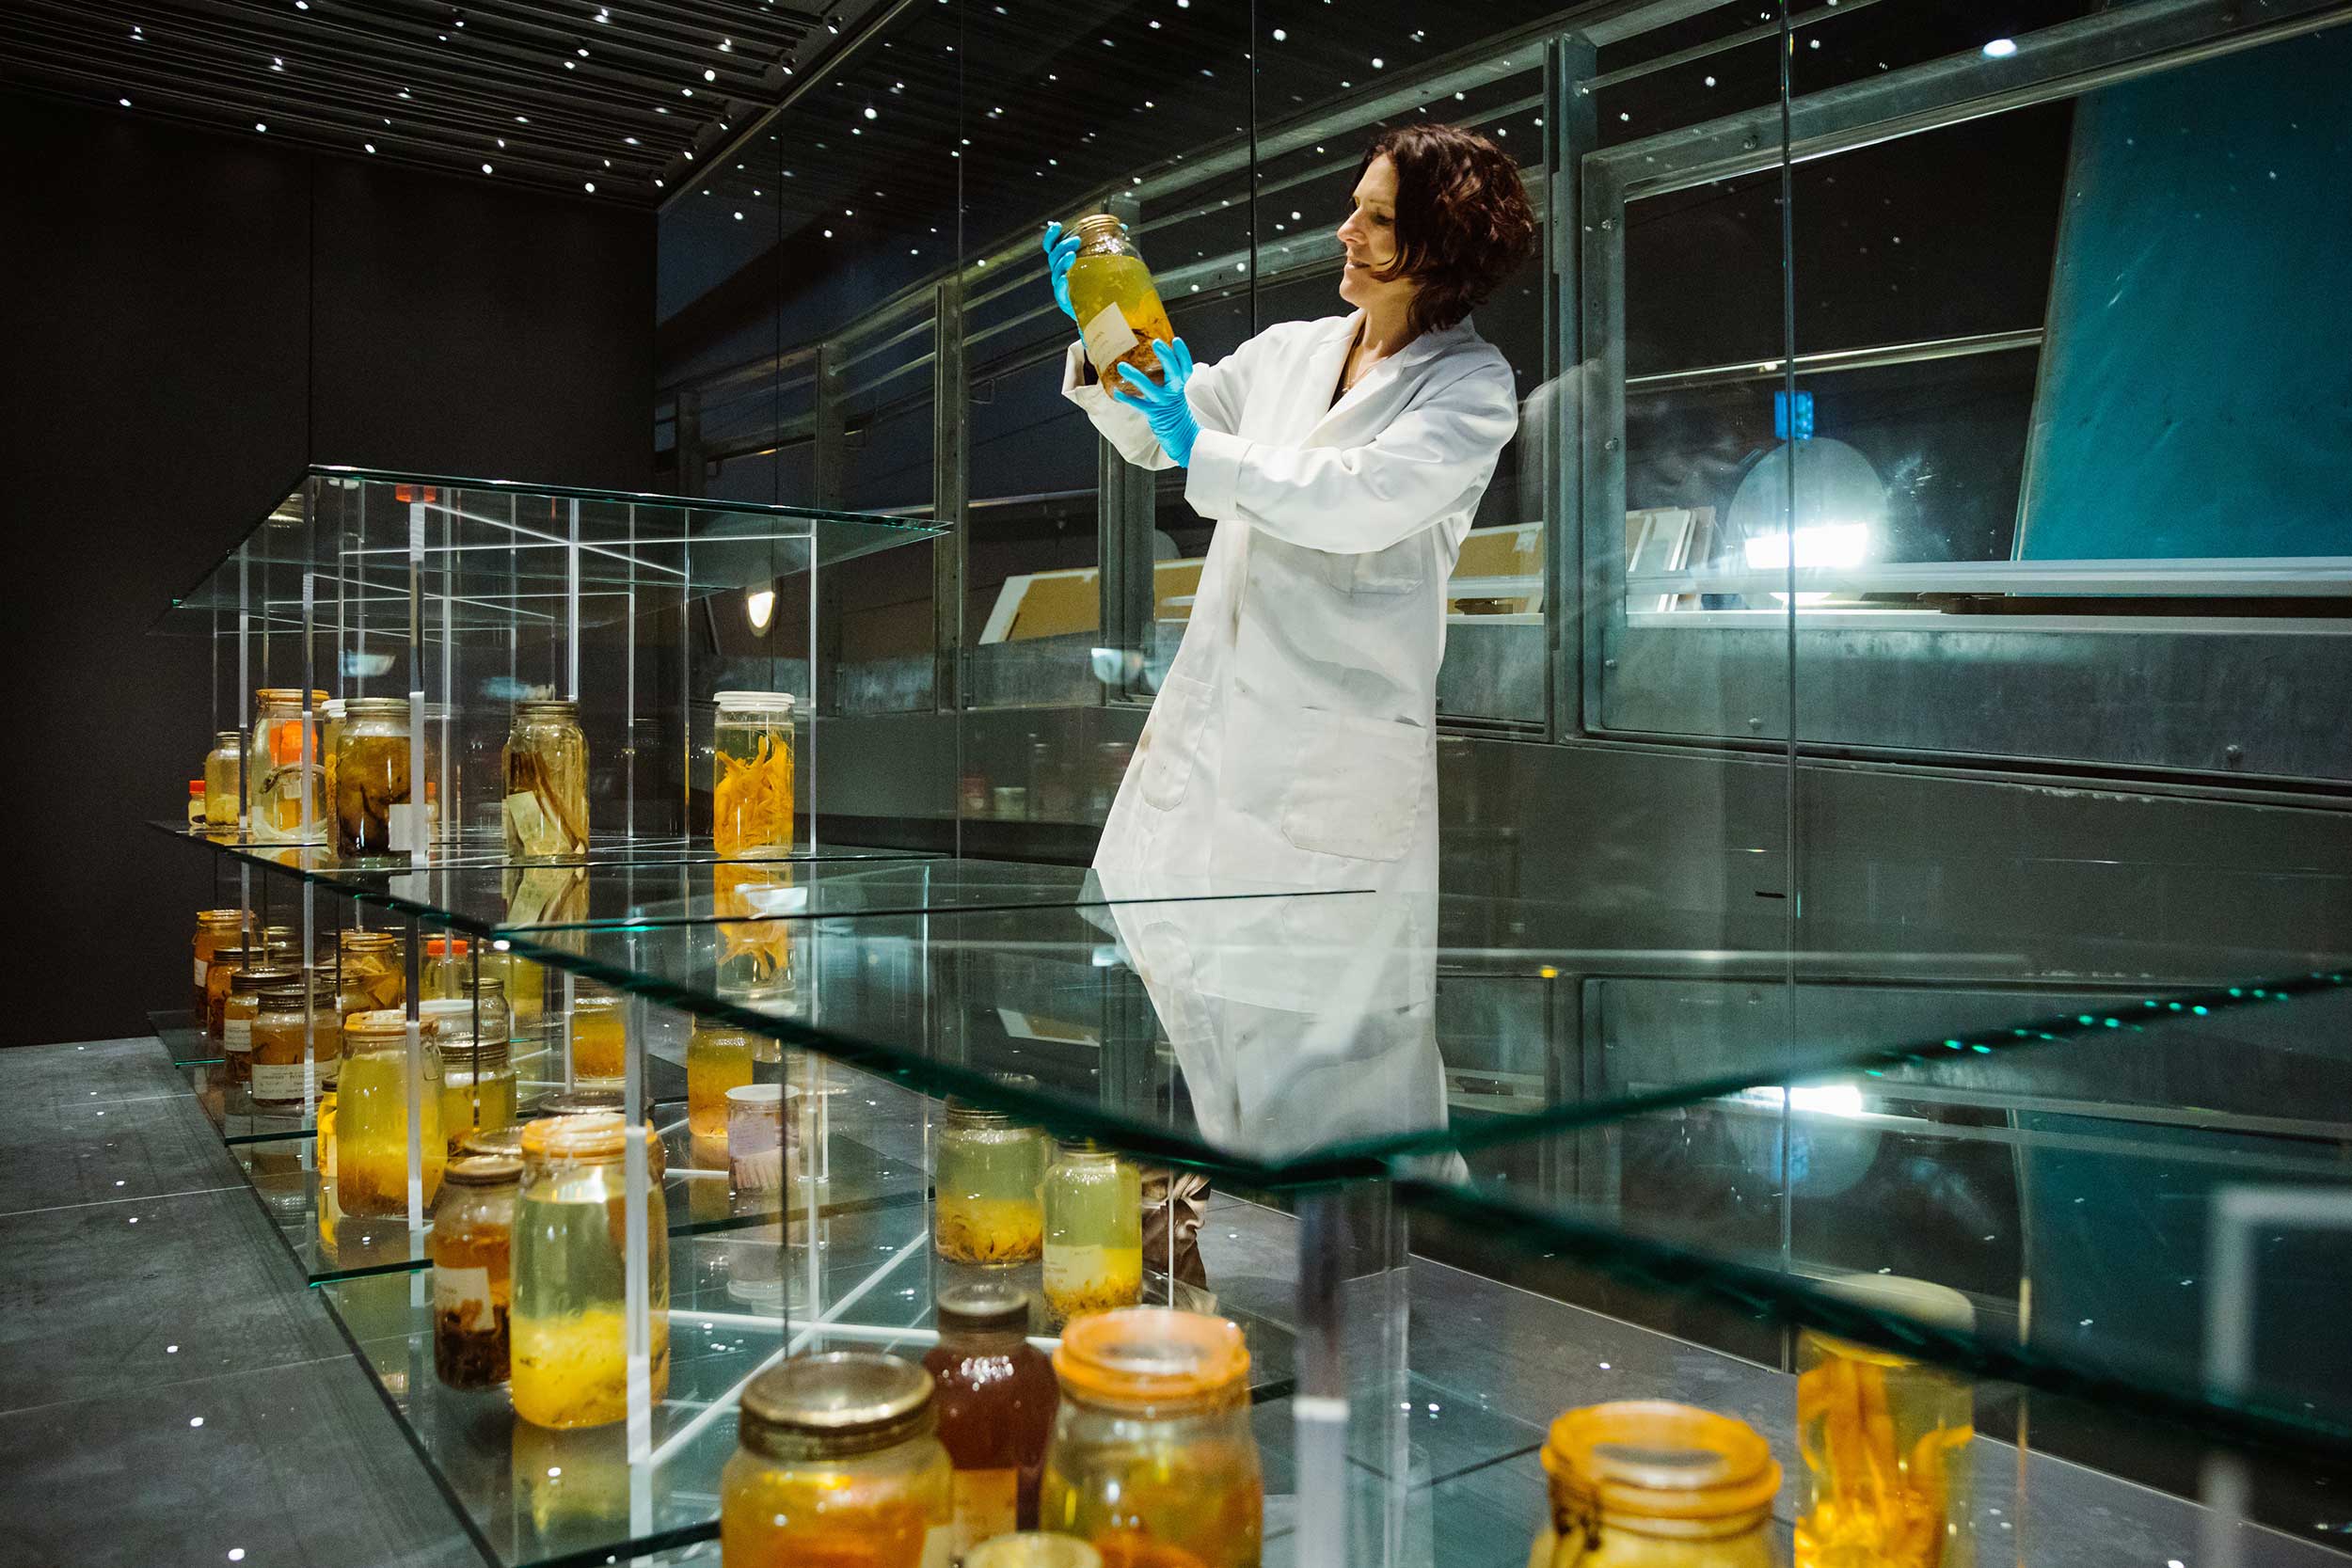 Dr Tammy Horton installs specimen jars in the Museum's 'Monsters of the Deep' exhibition.